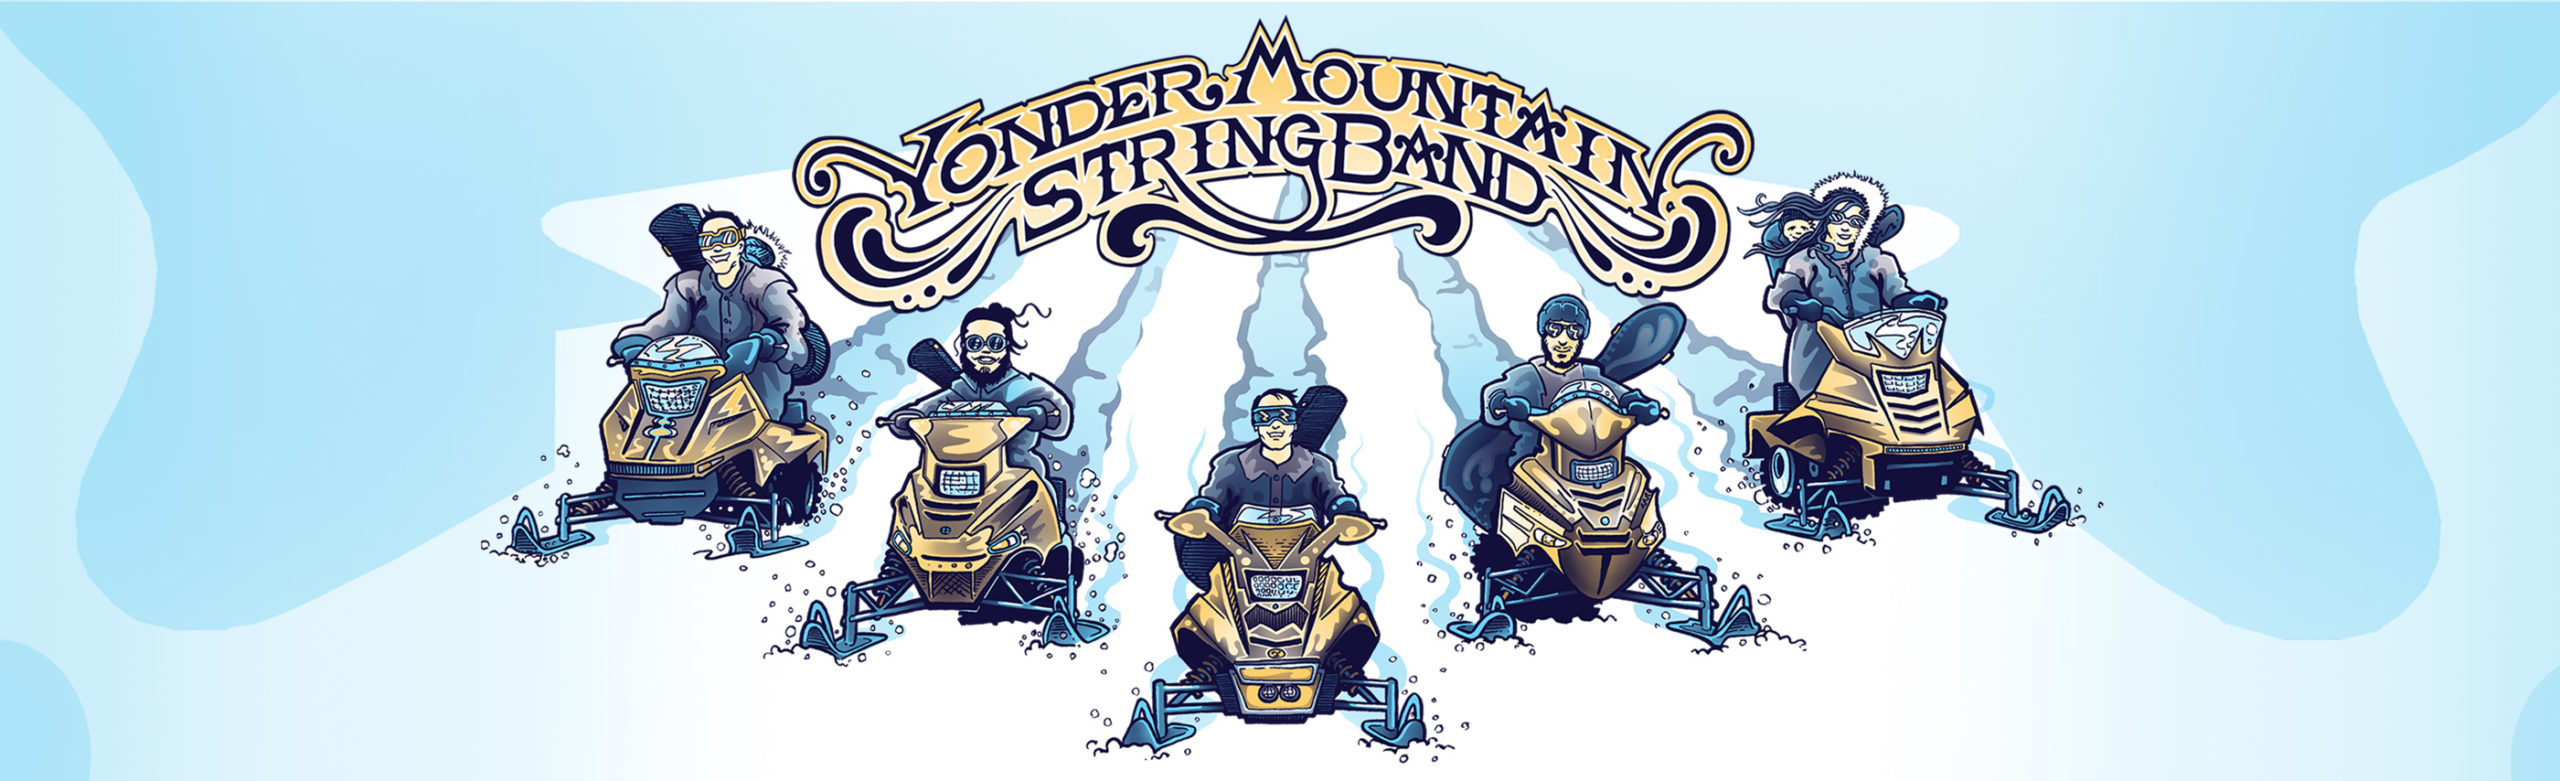 Yonder Mountain String Band to Perform at the Top Hat Image